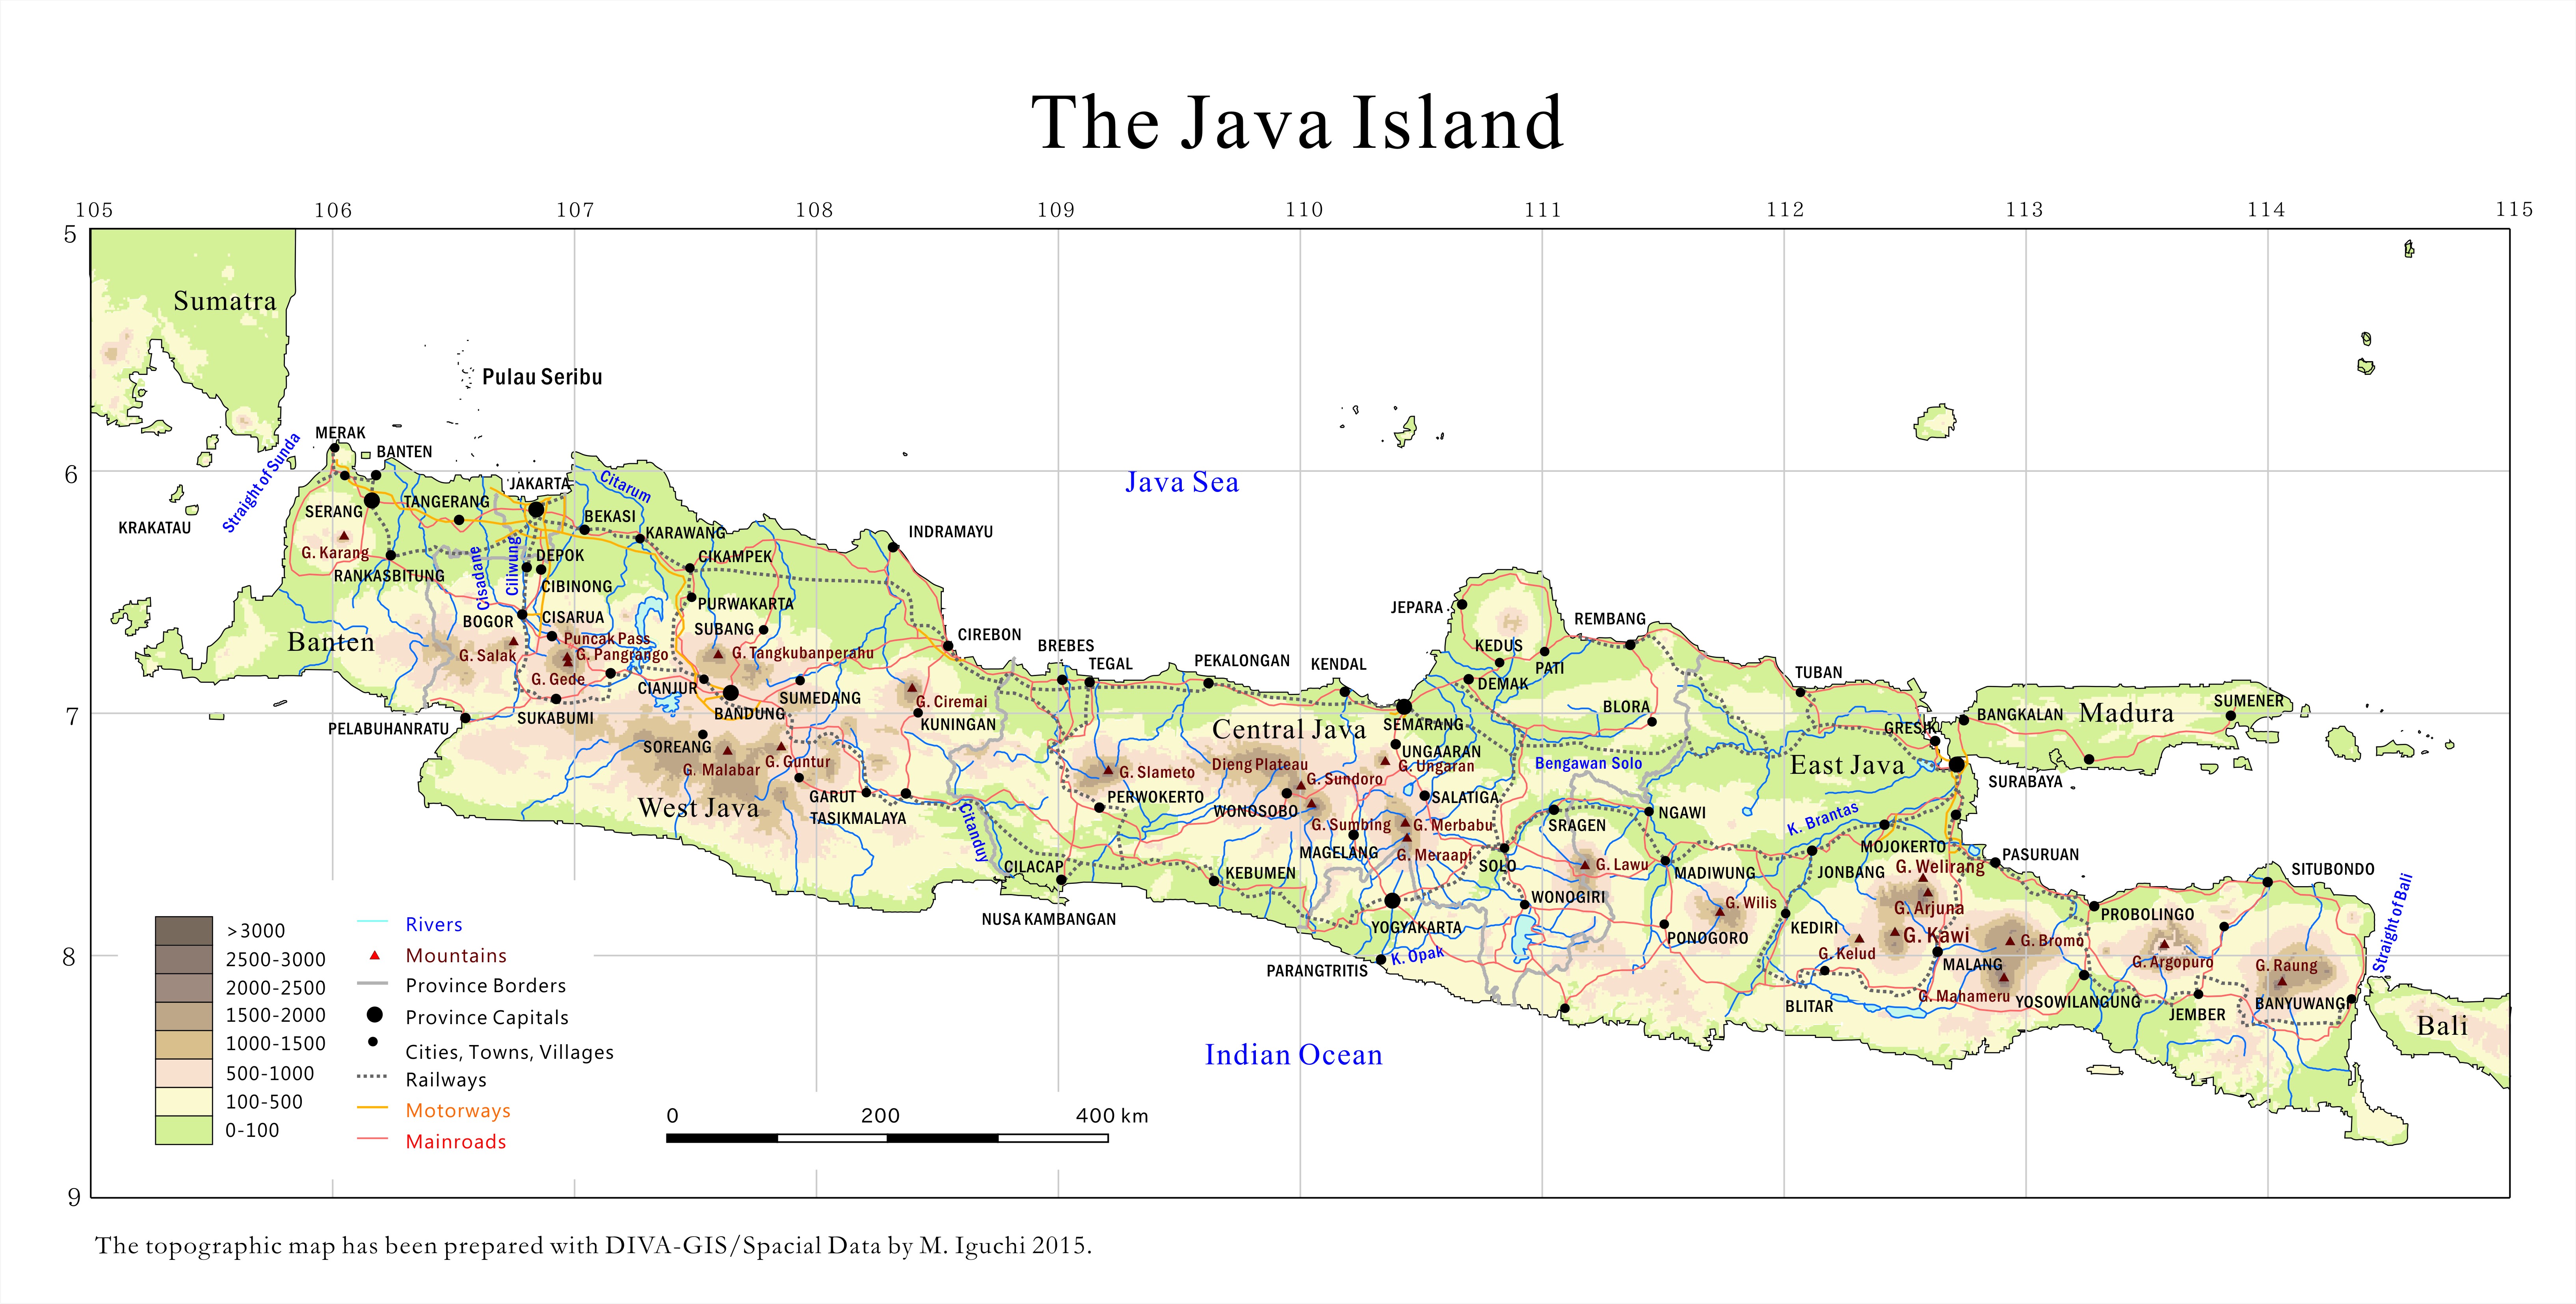 Java Map. Prepared with DIVA-GIS/Country Data/Indonesia  by M. Iguchi, February 2016